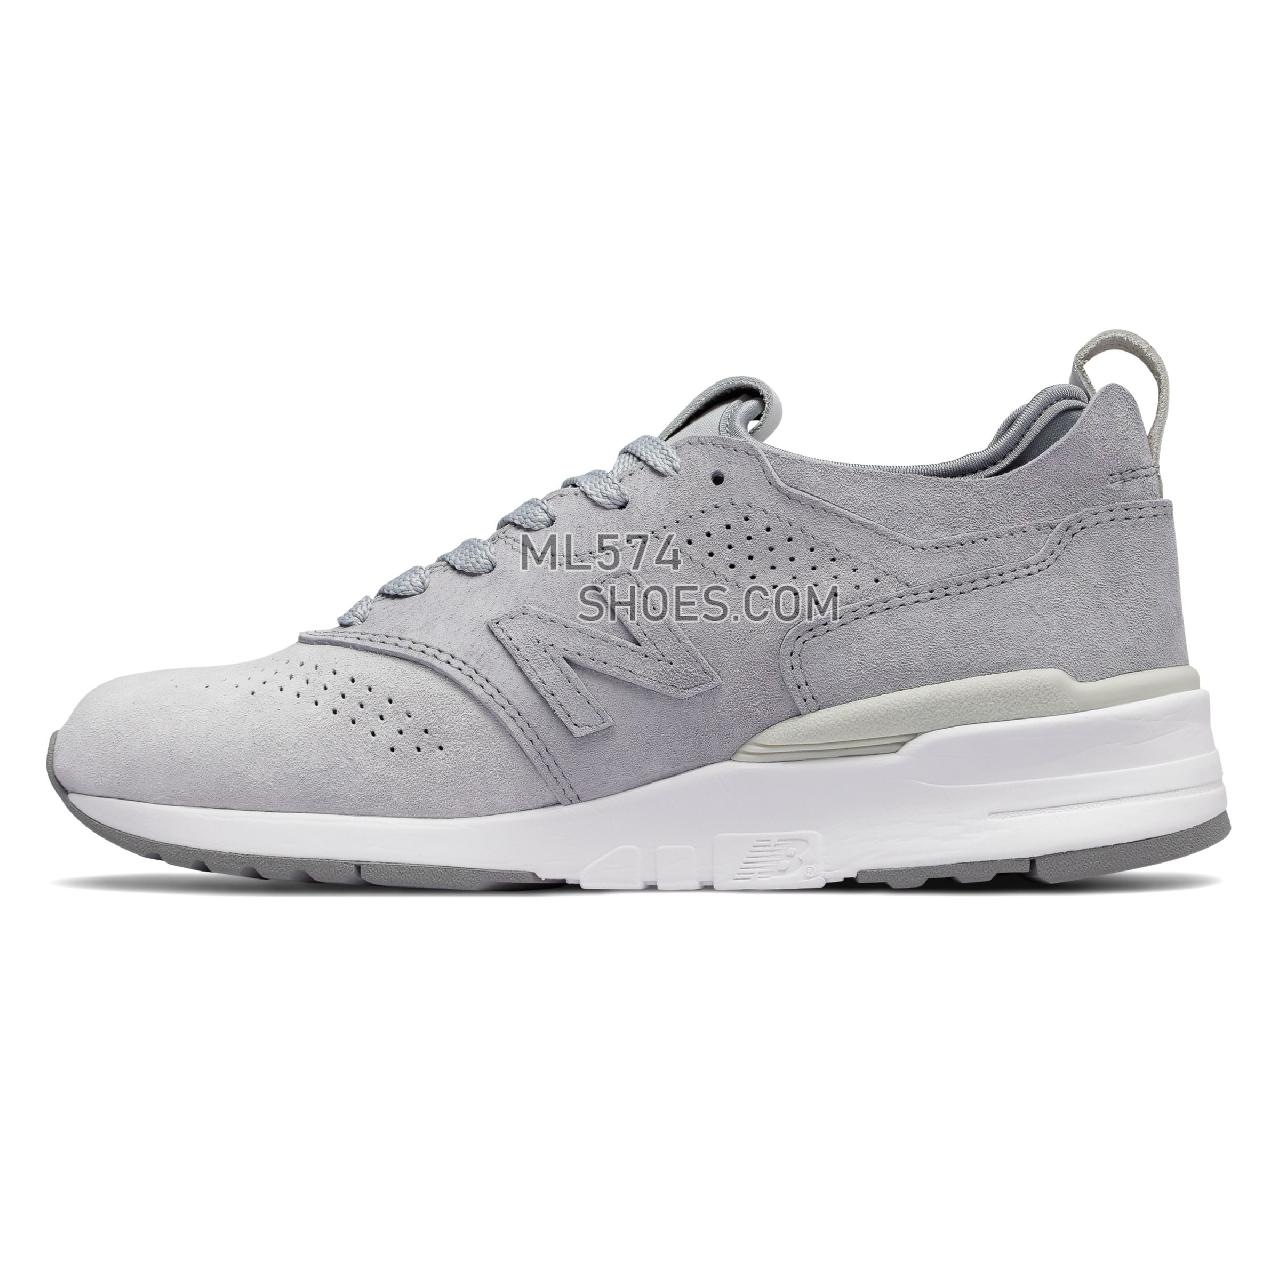 New Balance 997 Made in US Color Spectrum - Men's 997 - Classic Nimbus Cloud with Silver Mink - M997DS2